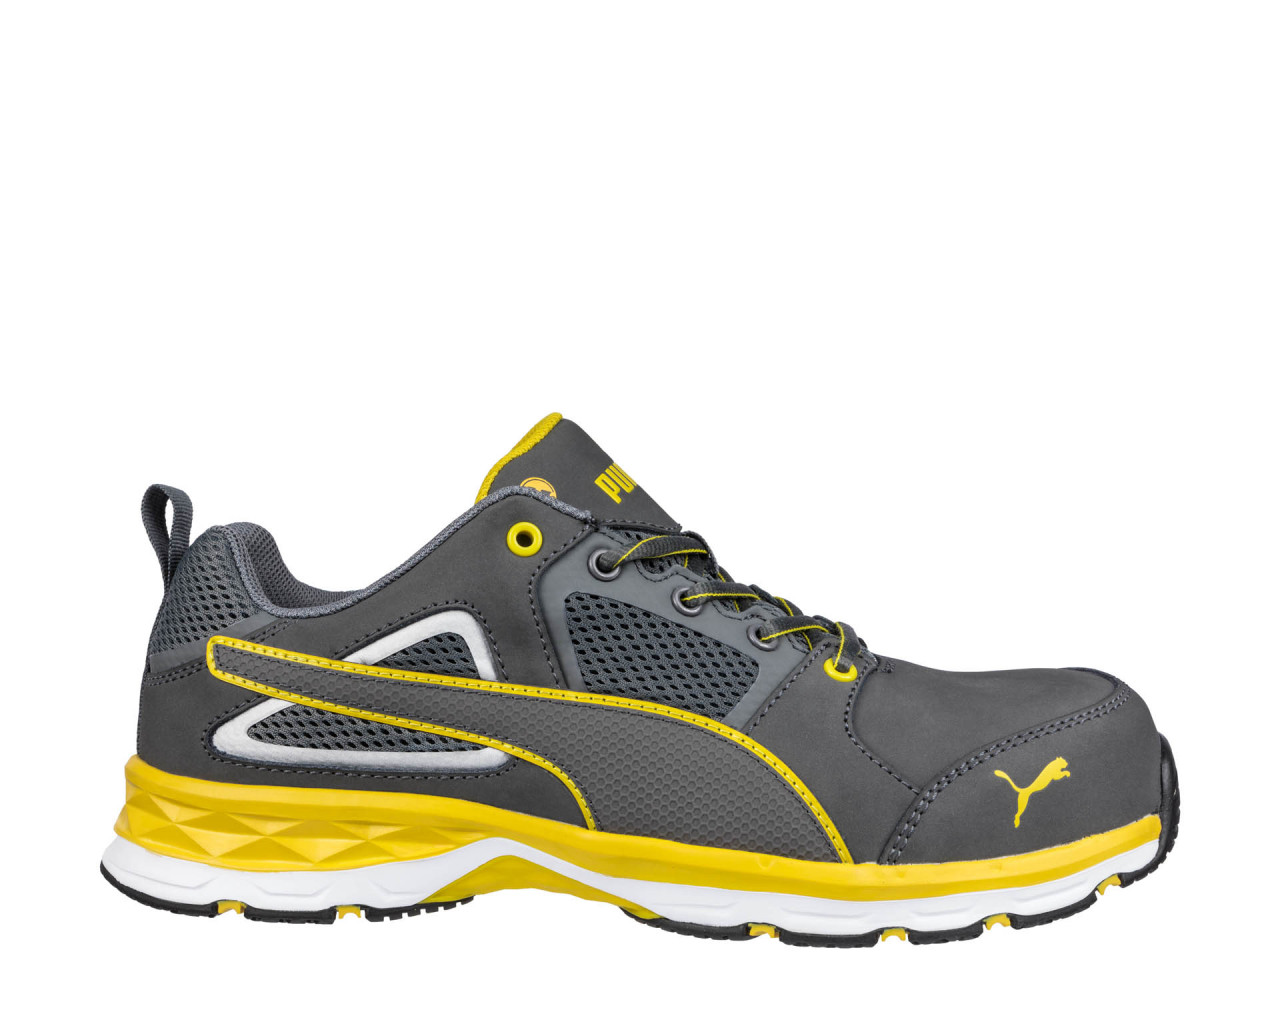 PUMA SAFETY safety shoes S1P ESD HRO SRC PACE 2.0 YELLOW LOW | Puma Safety  English